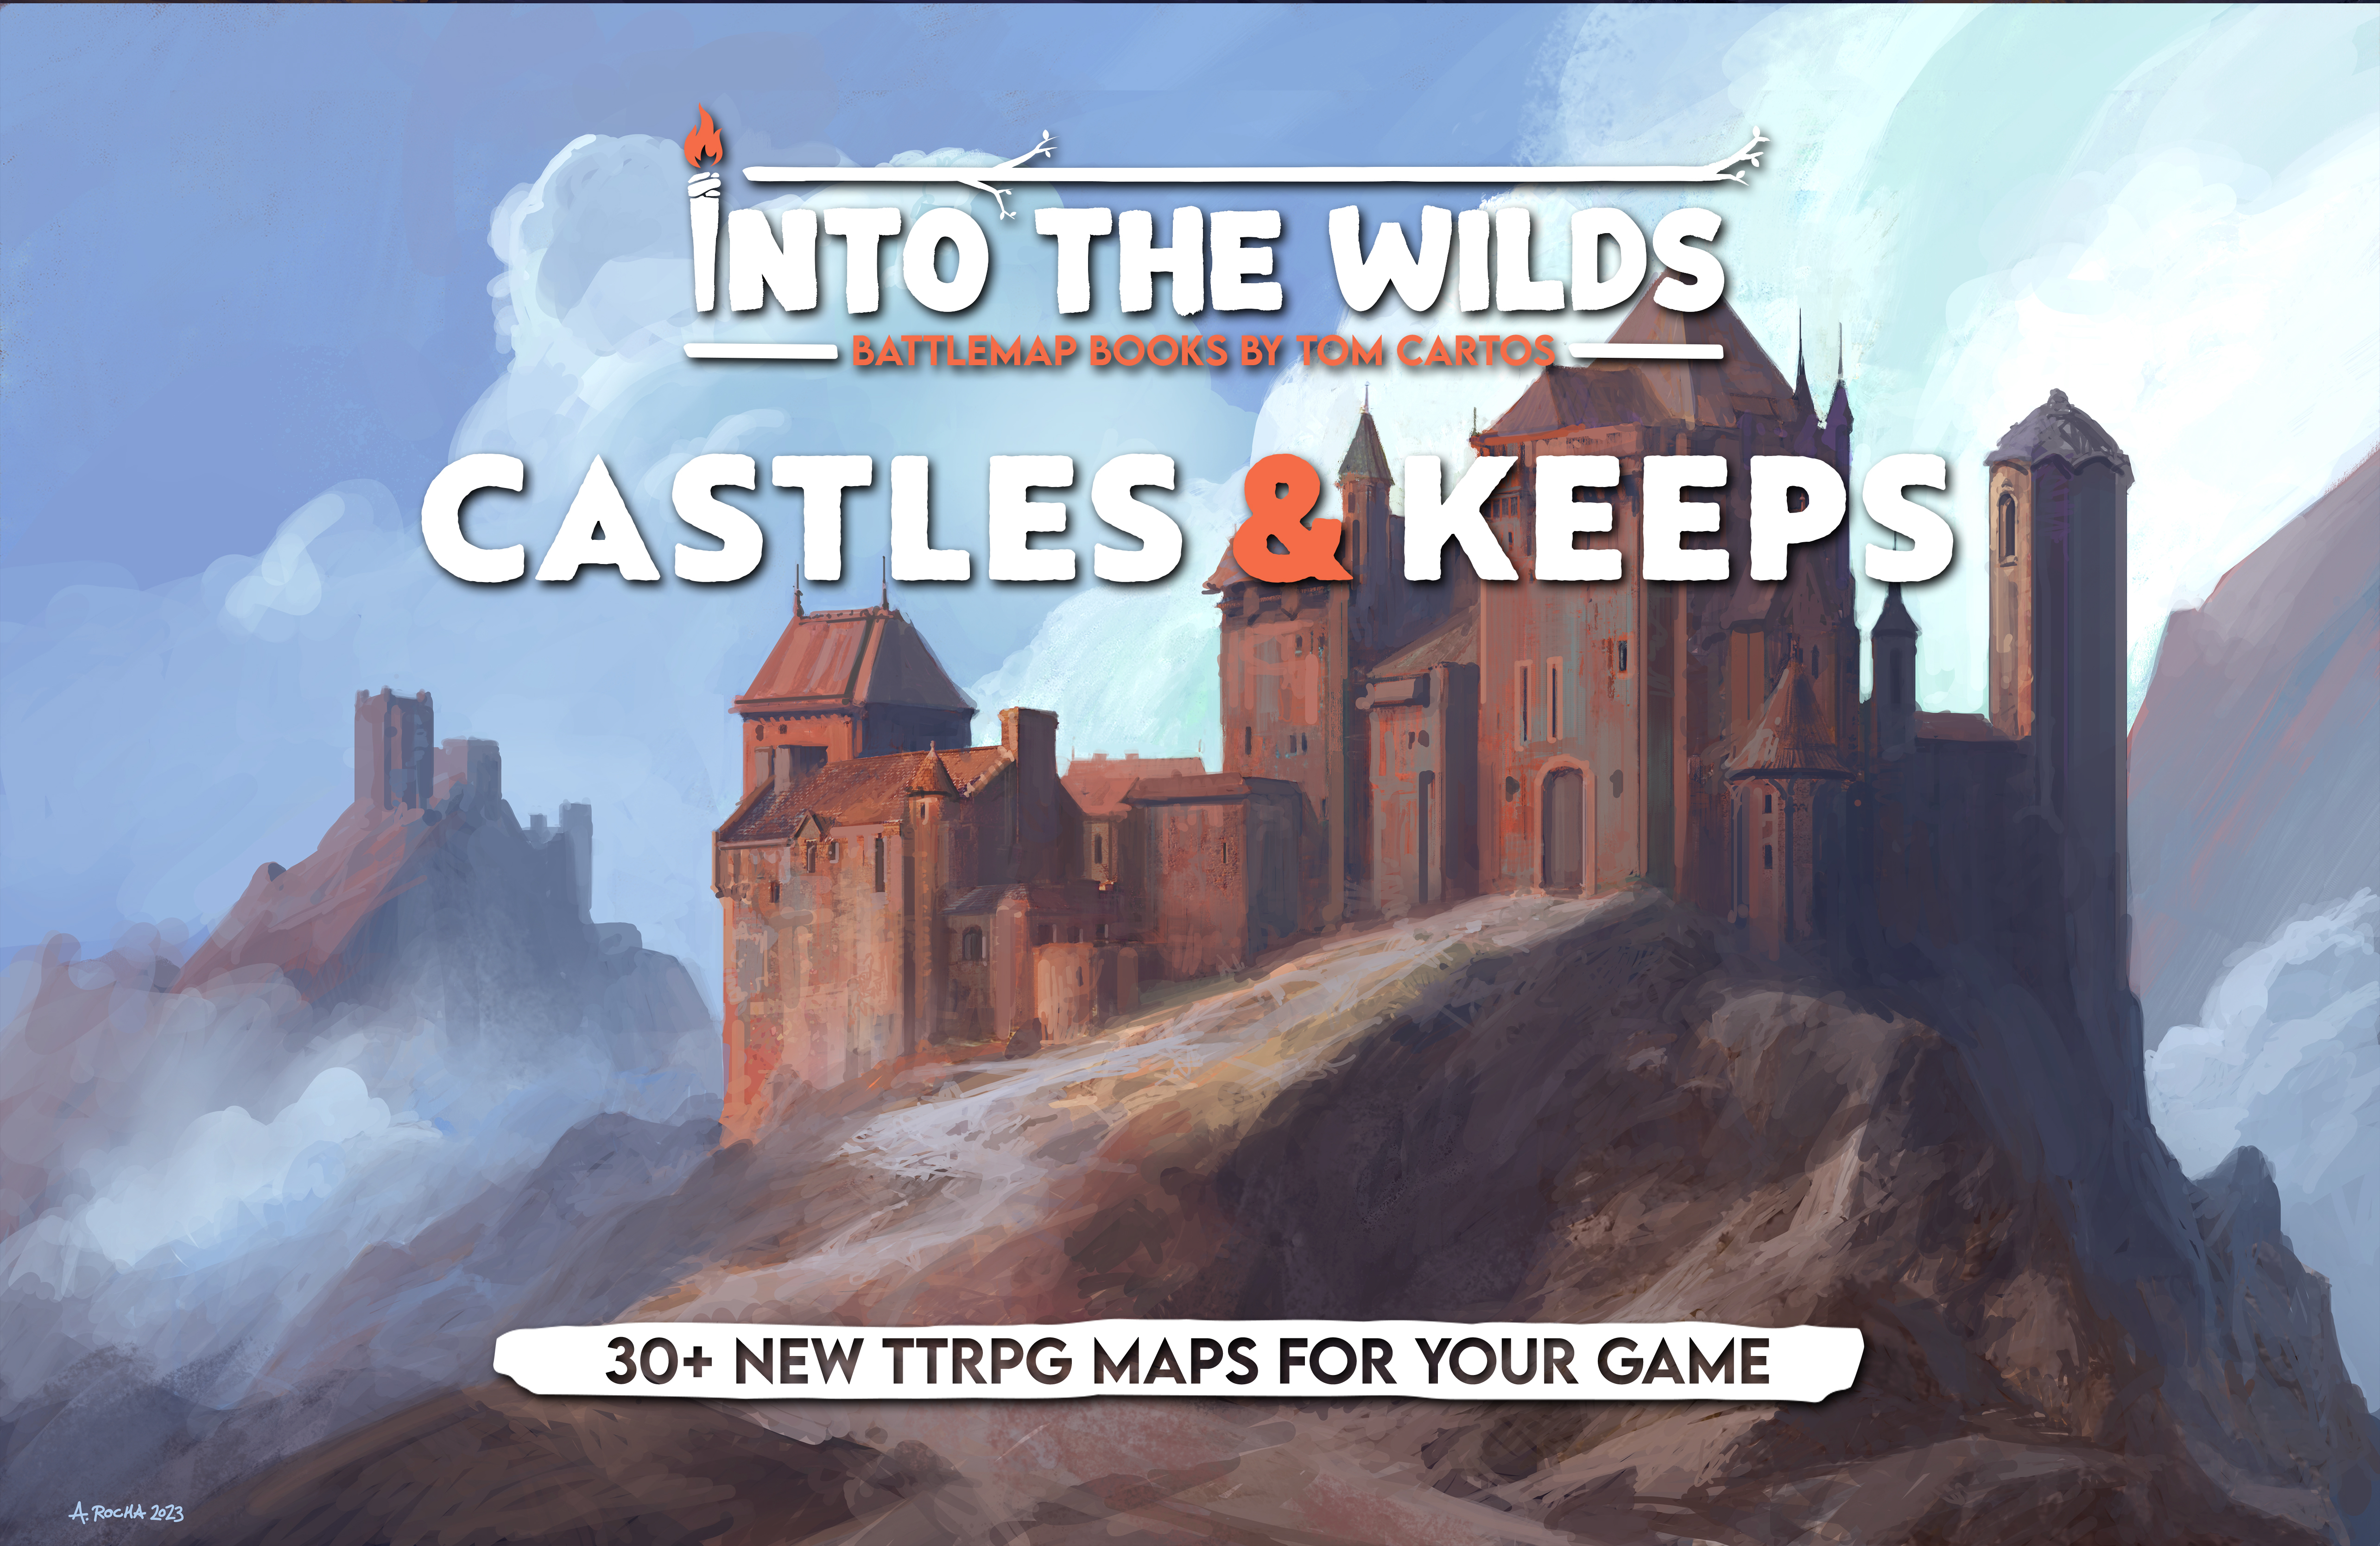 Into the Wilds Battlemap Books: Castles and Keeps 